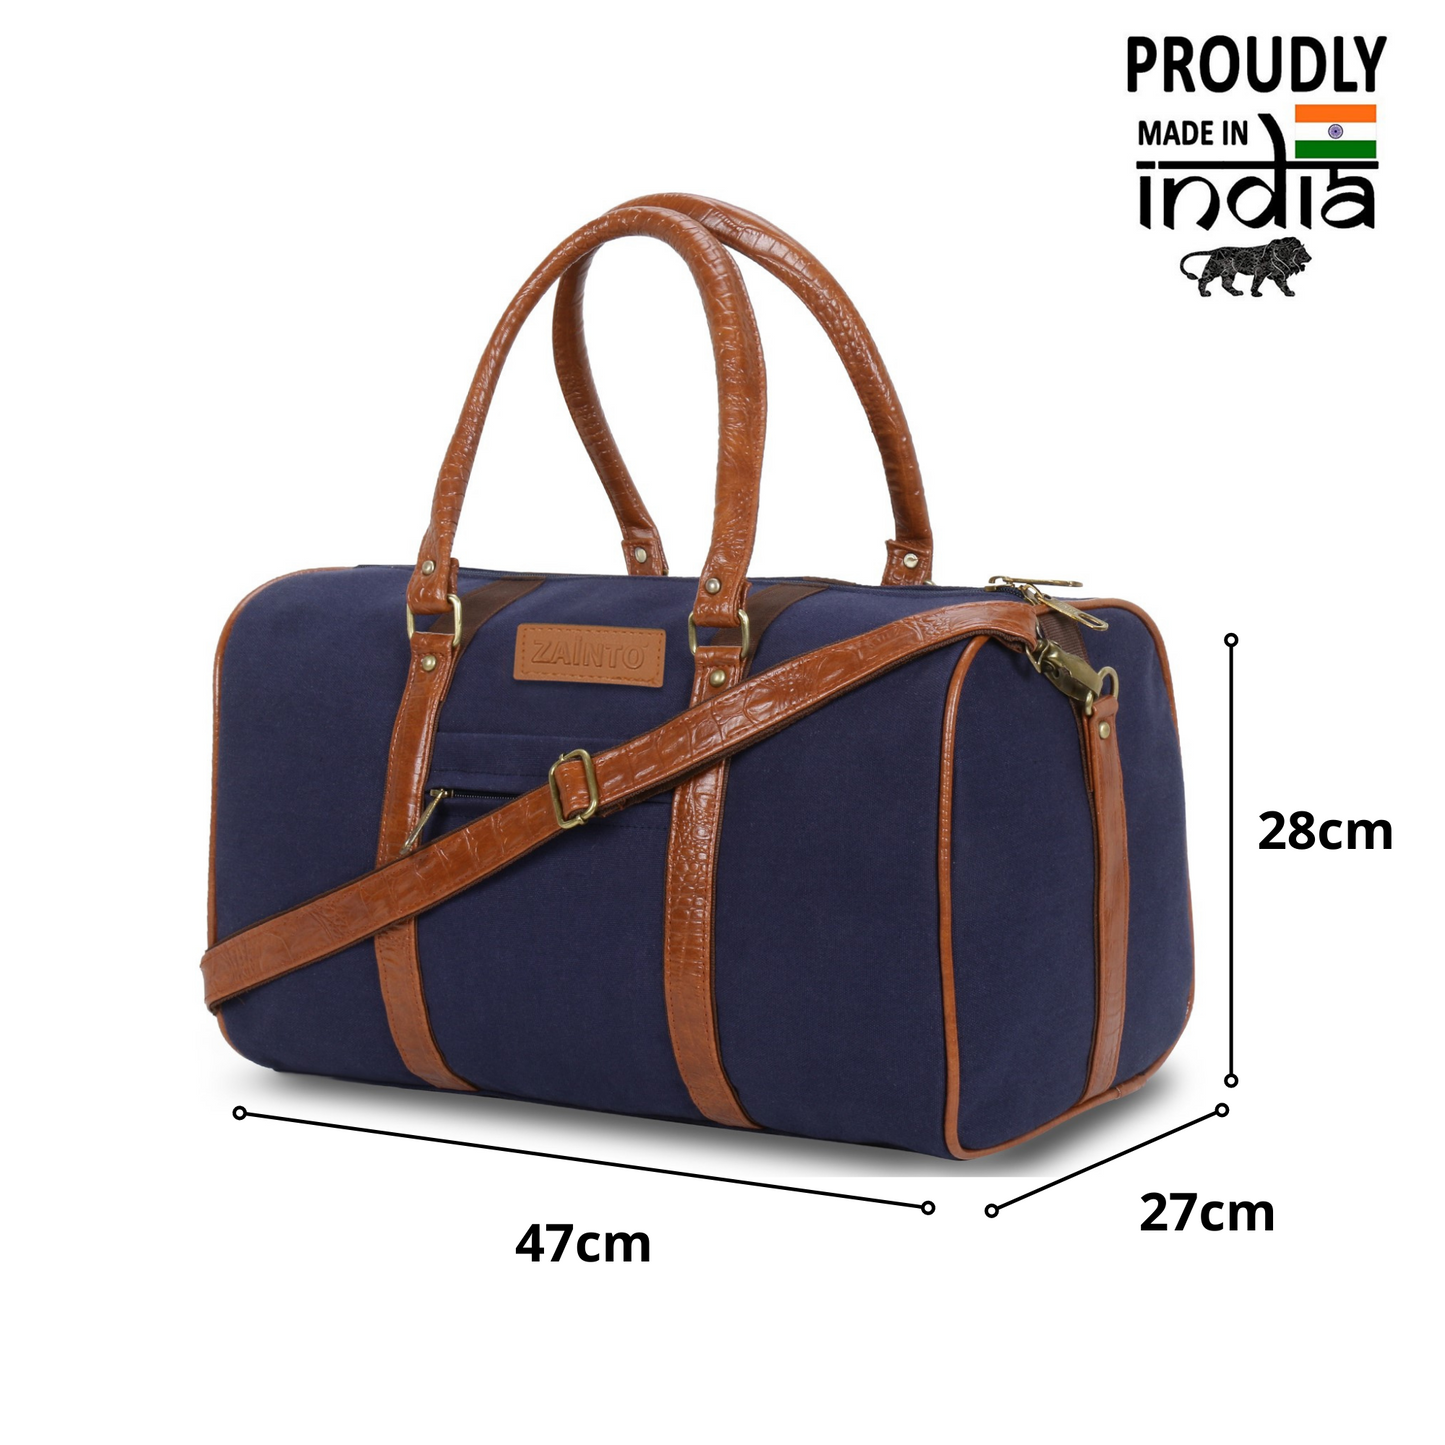 ZAINTO Canvas stylish weekender travel duffle bag for men and women (Navy Blue)